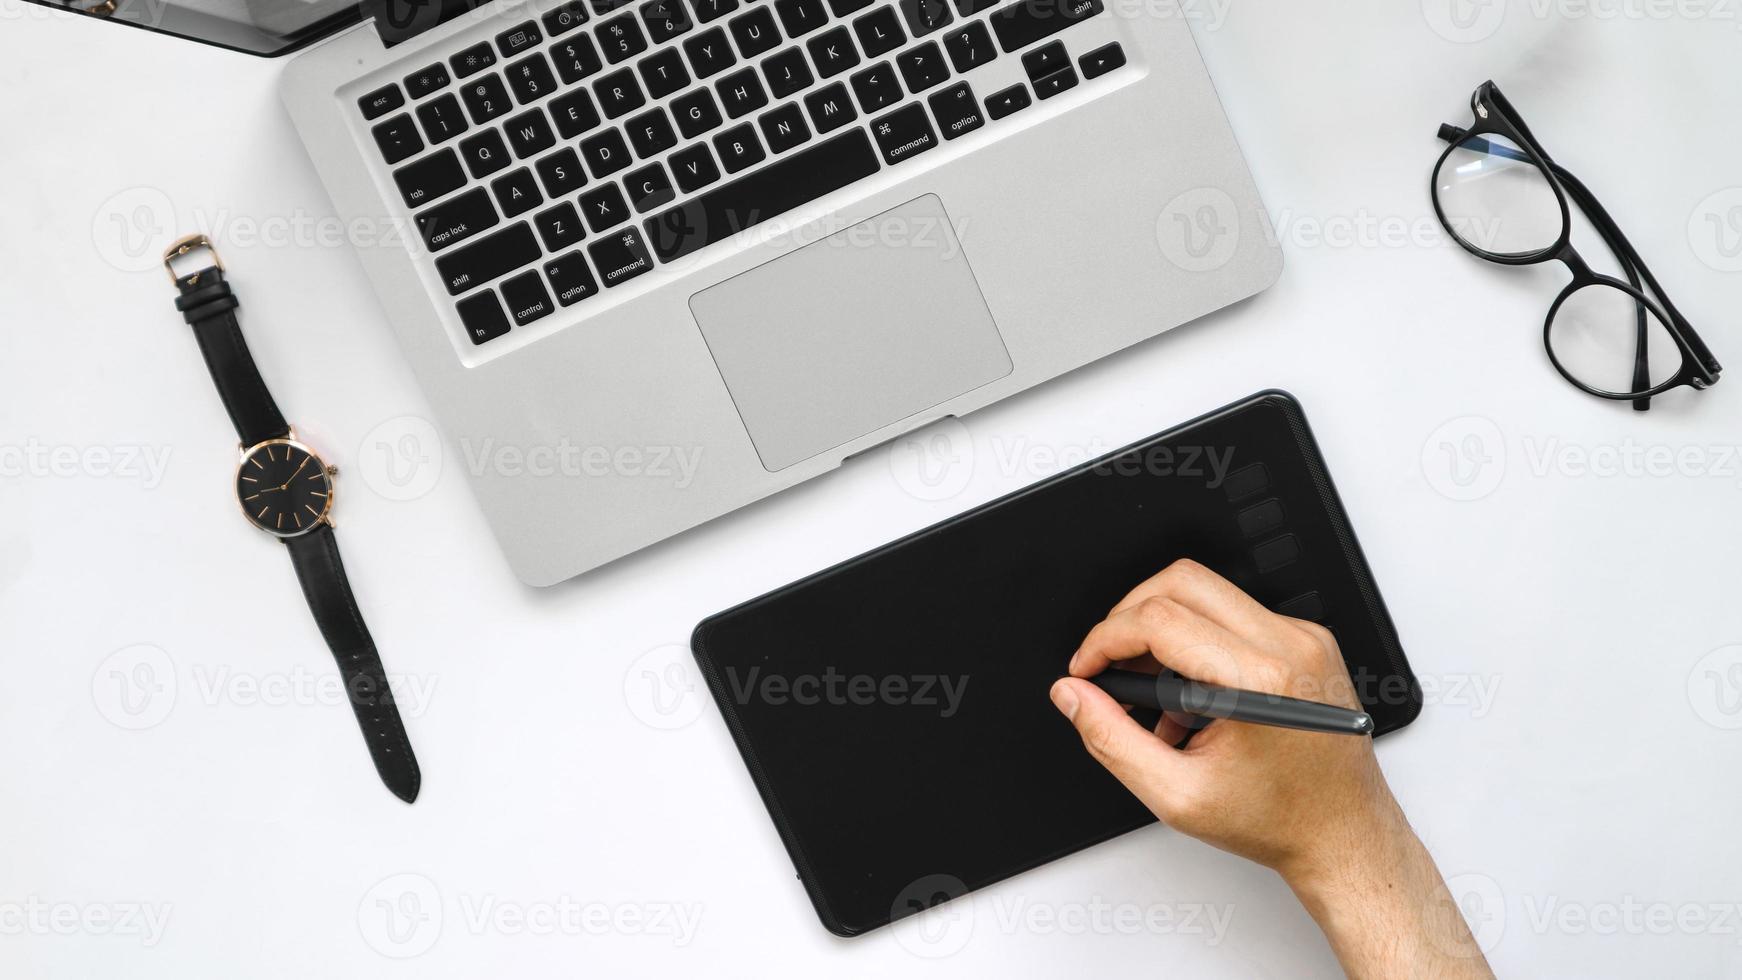 Table view of laptop, pen tablet and wrist watch on white background photo